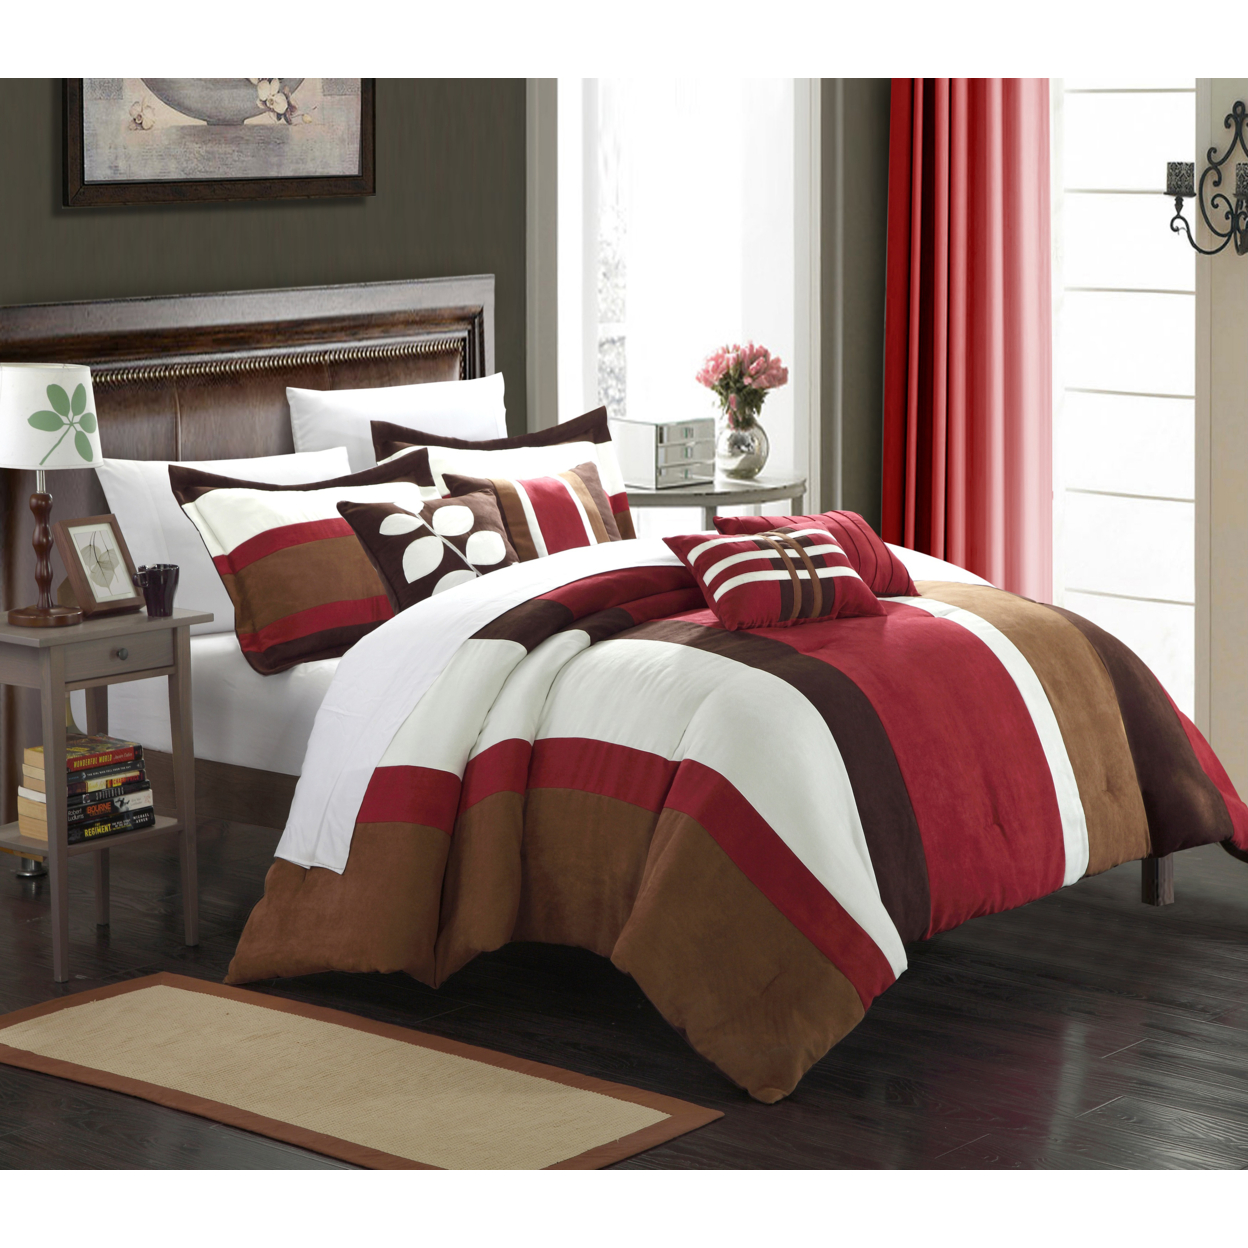 Chic Home Melodie 7-Piece Plush Microsuede Striped Comforter Set - Burgundy, King